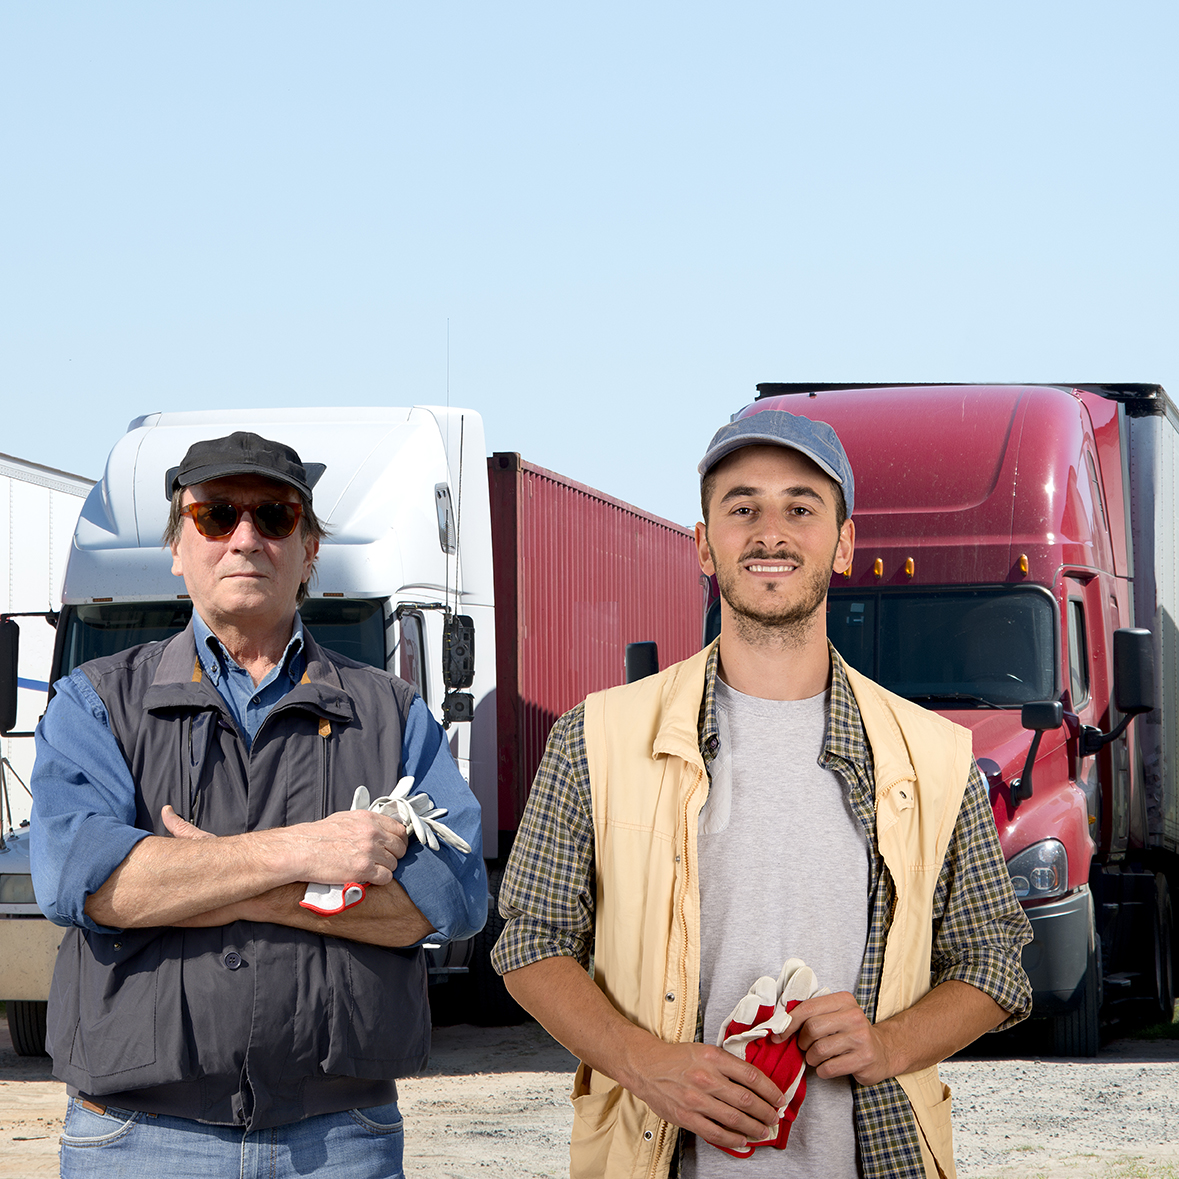 Truck drivers who receive a ticket use attorney Steven Ginsberg to defend their CDL in Rockland County, Orange County or New York State